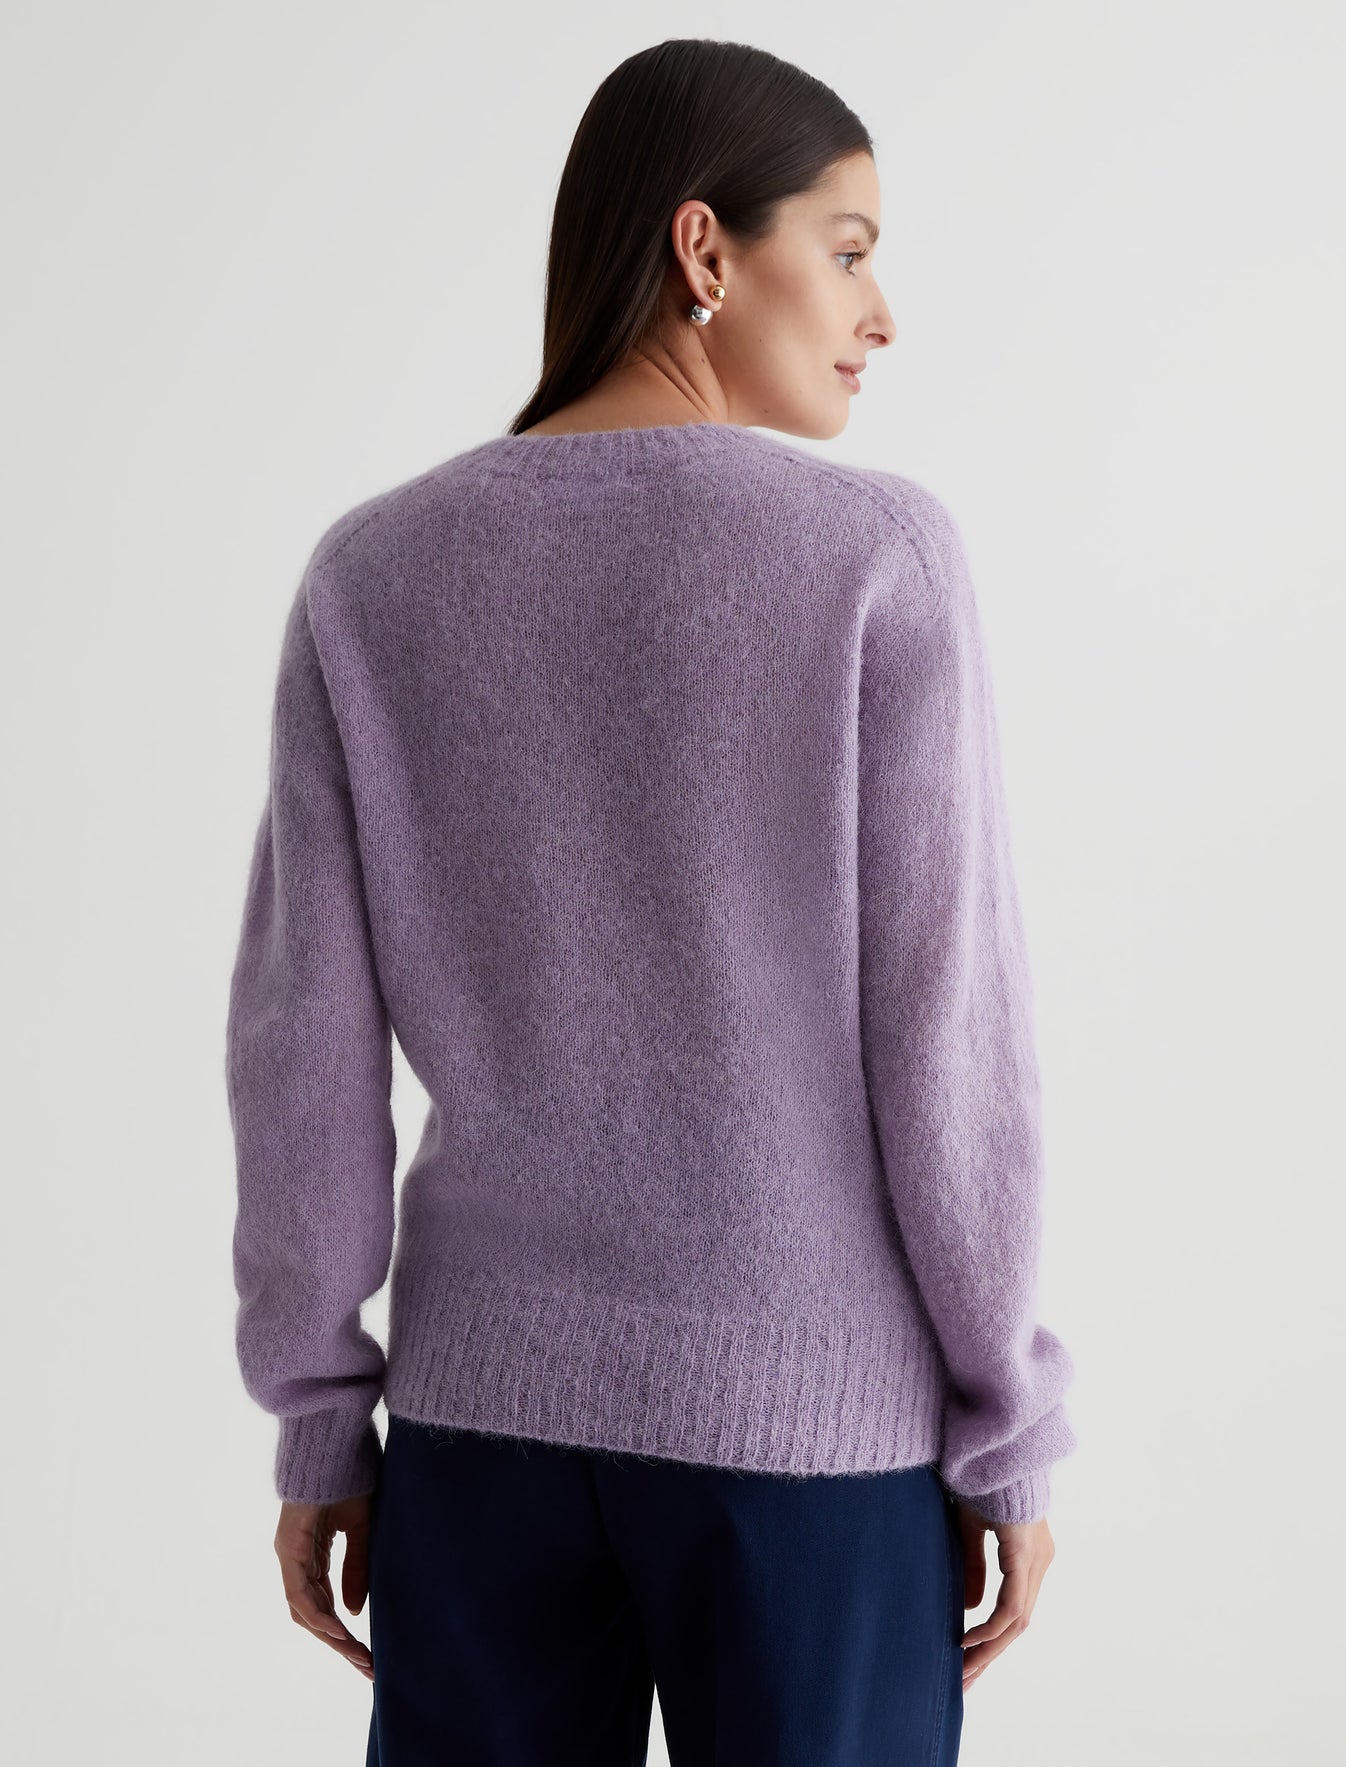 Morgan Crew Dark Orchid Relaxed Fit Crew Neck Sweater Women Top Photo 6